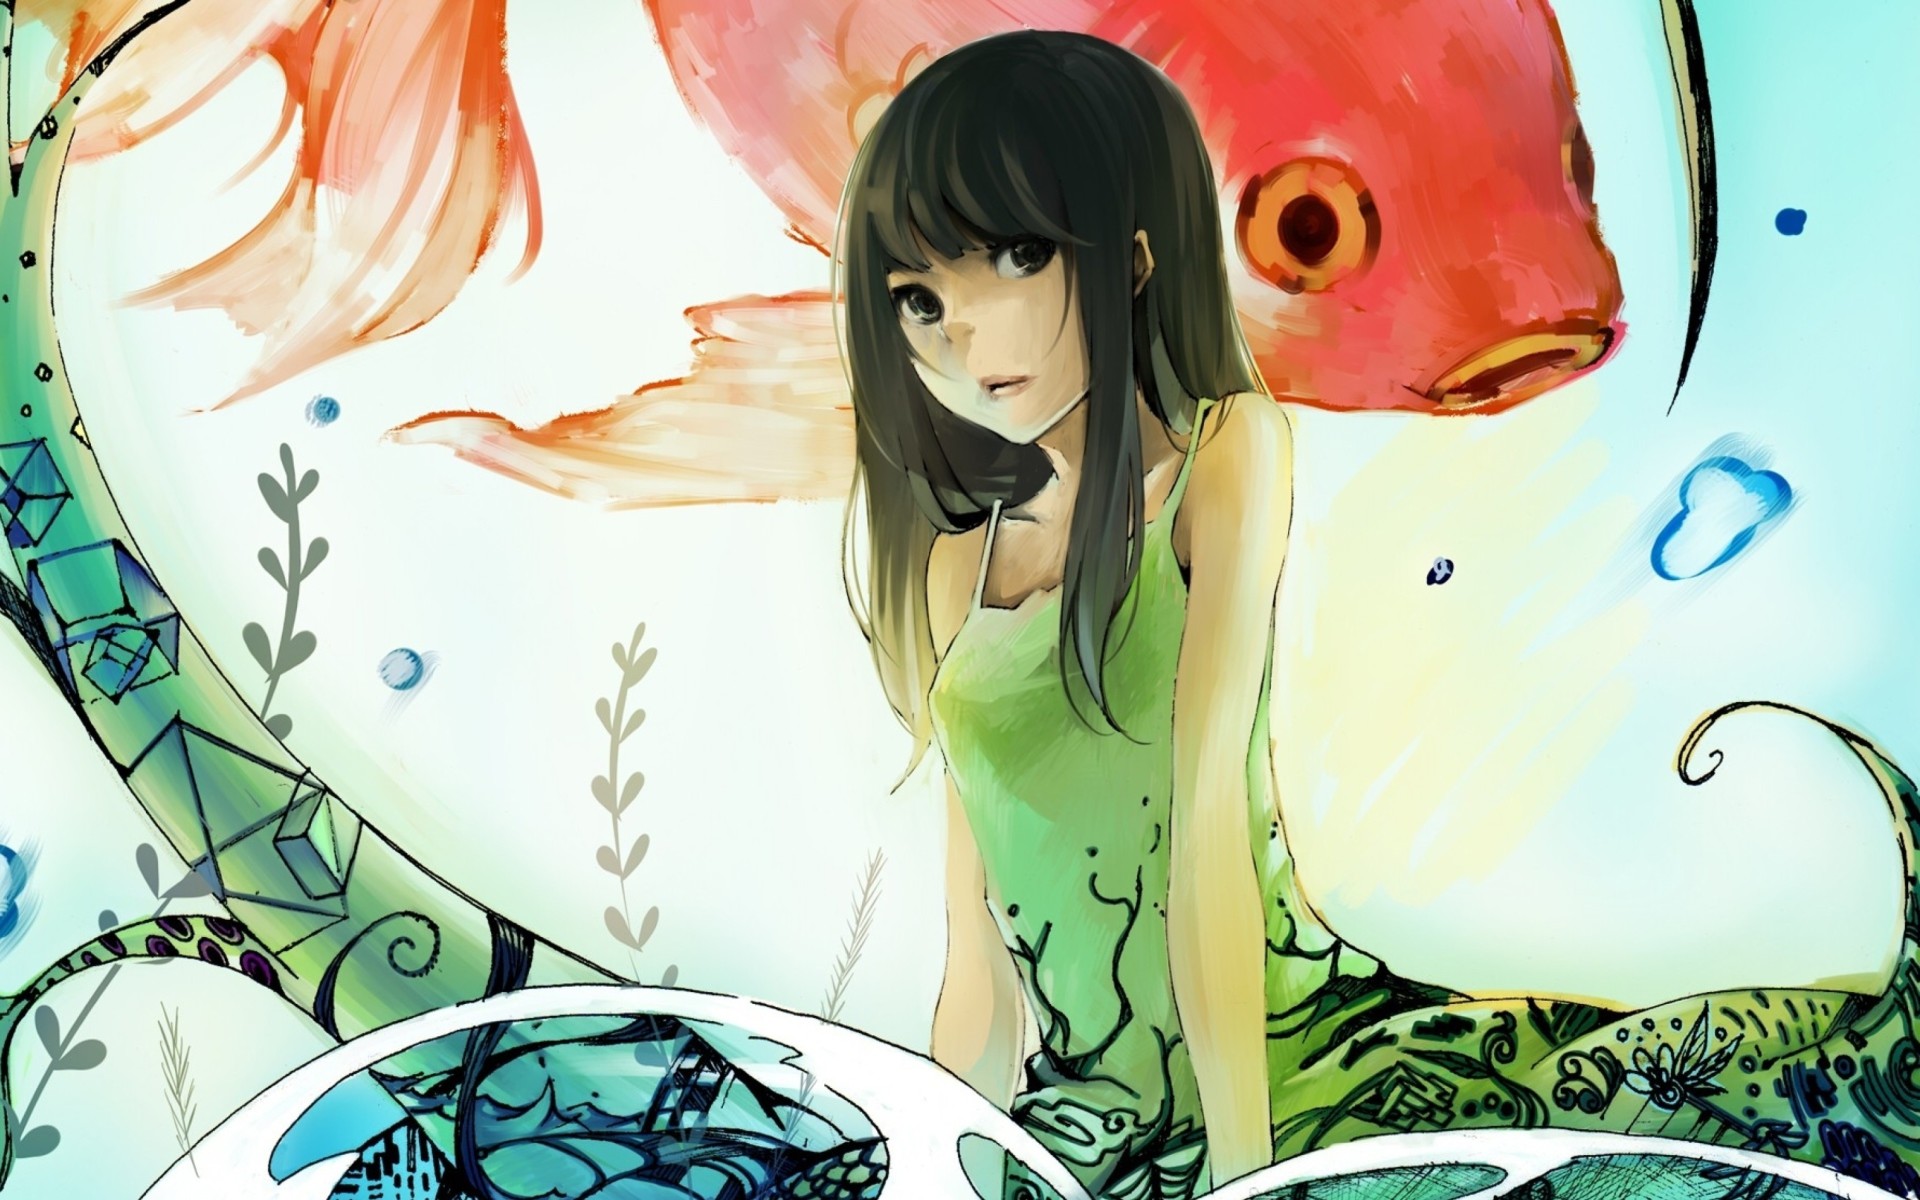 1920x1200 Cute Anime Girl & Fishes desktop PC and Mac wallpaper